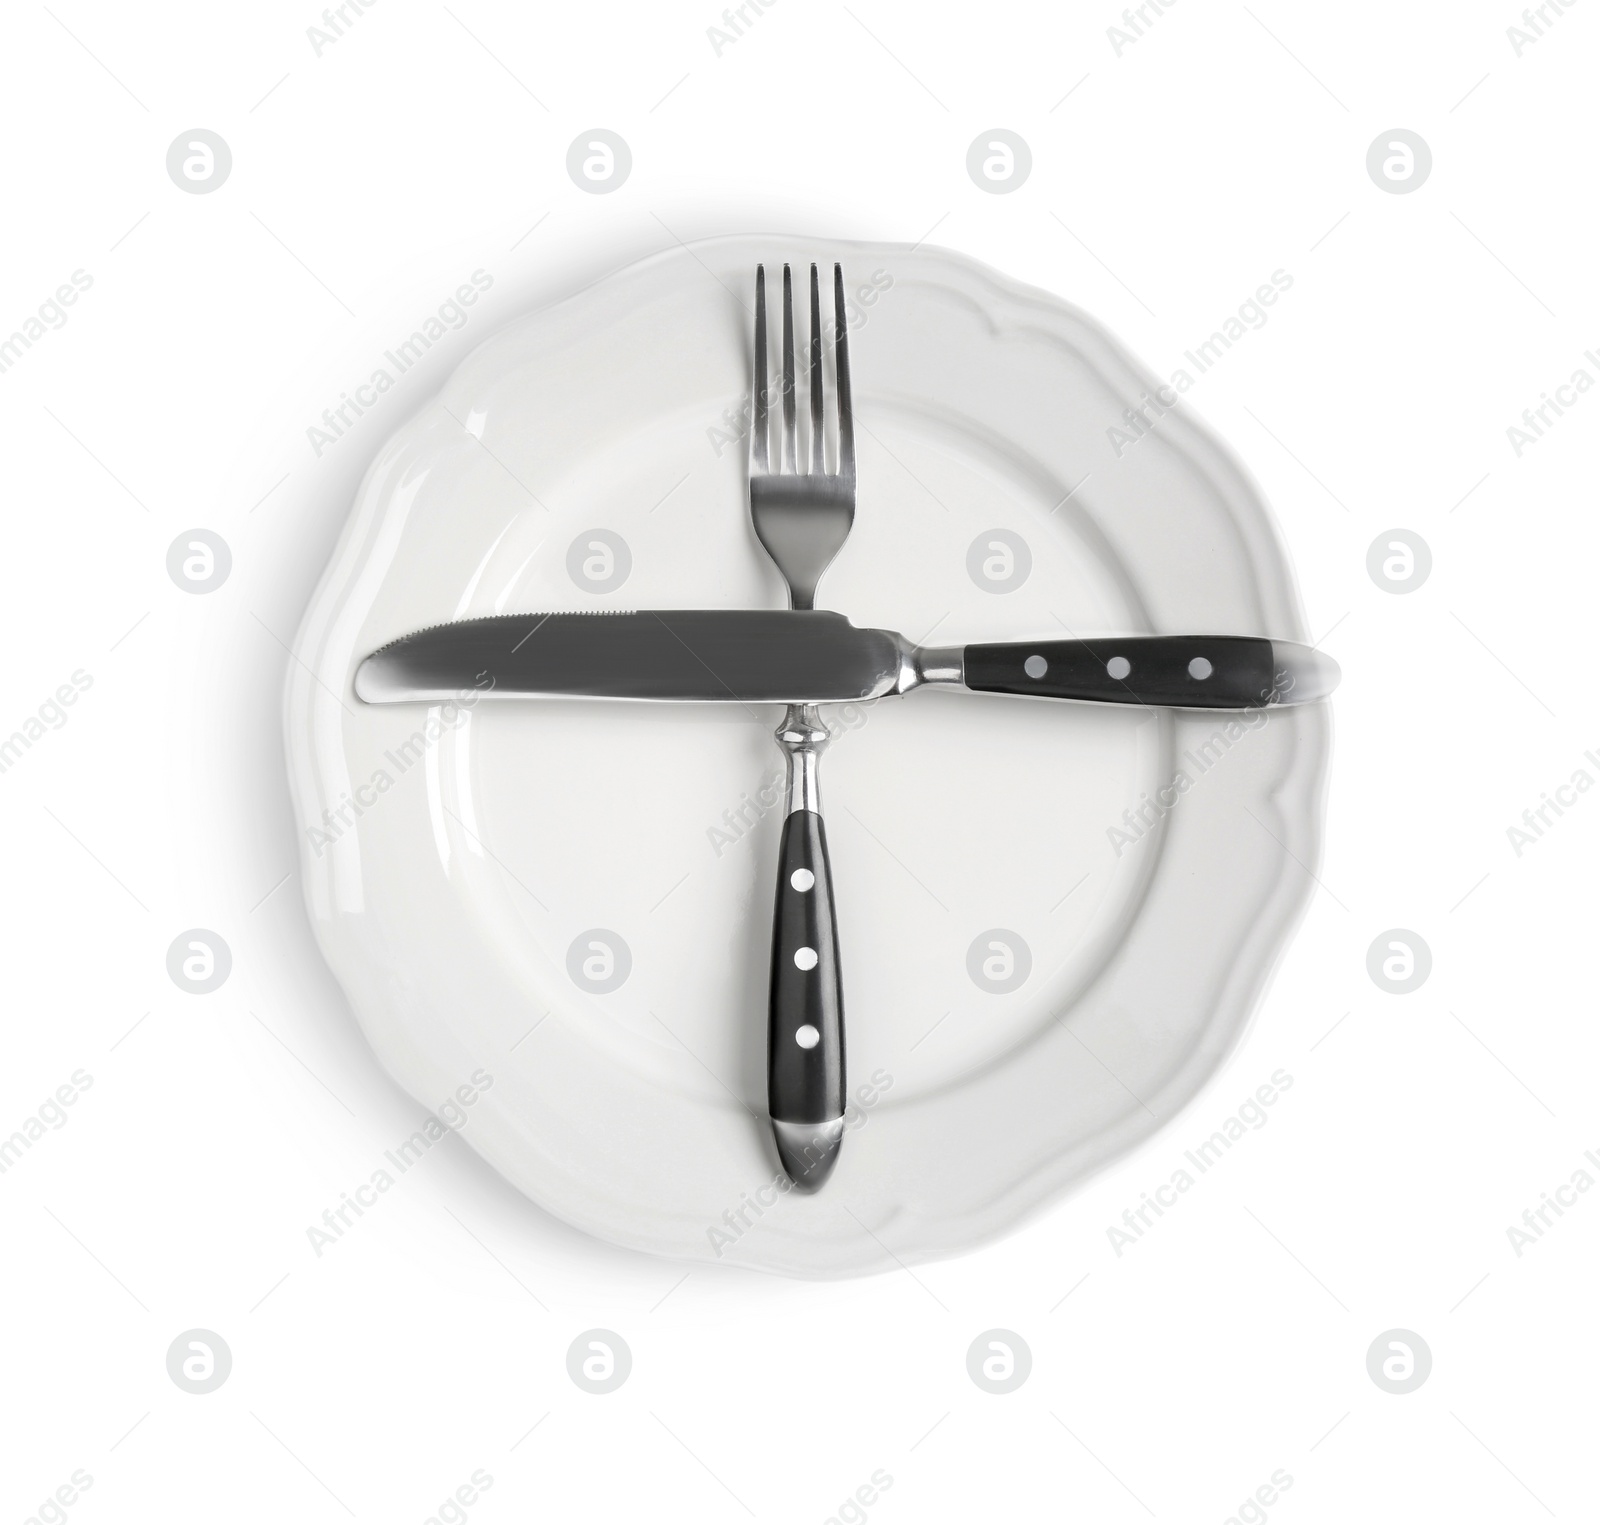 Photo of Ceramic plate, fork and knife on white table, top view